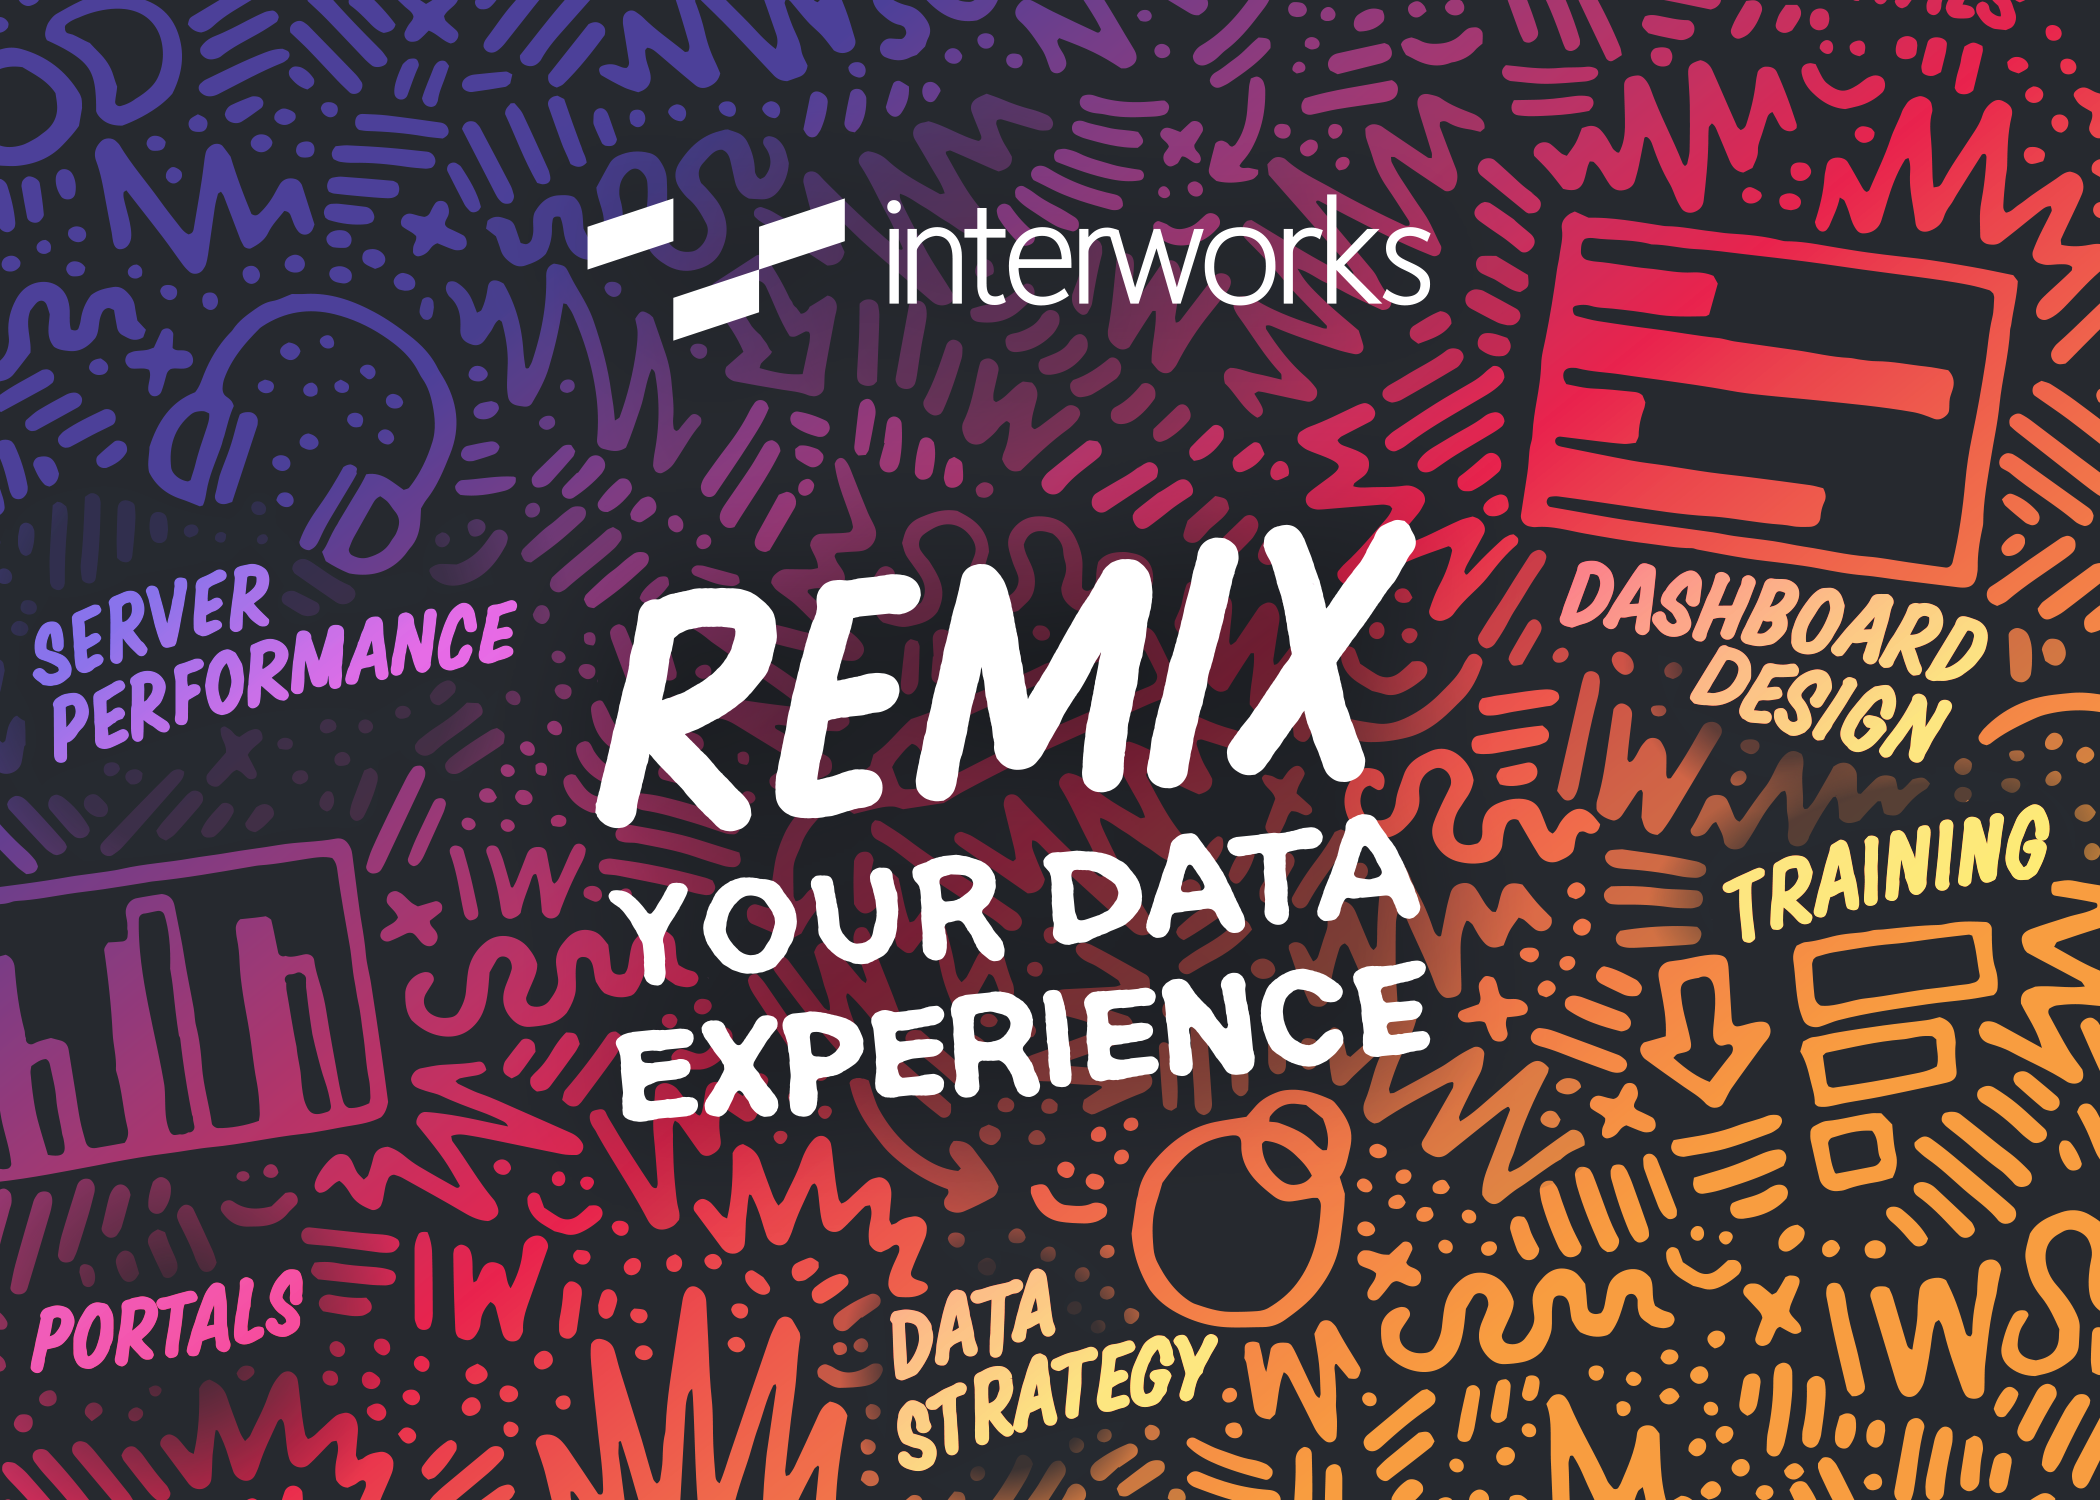 Remix Your Data Experience